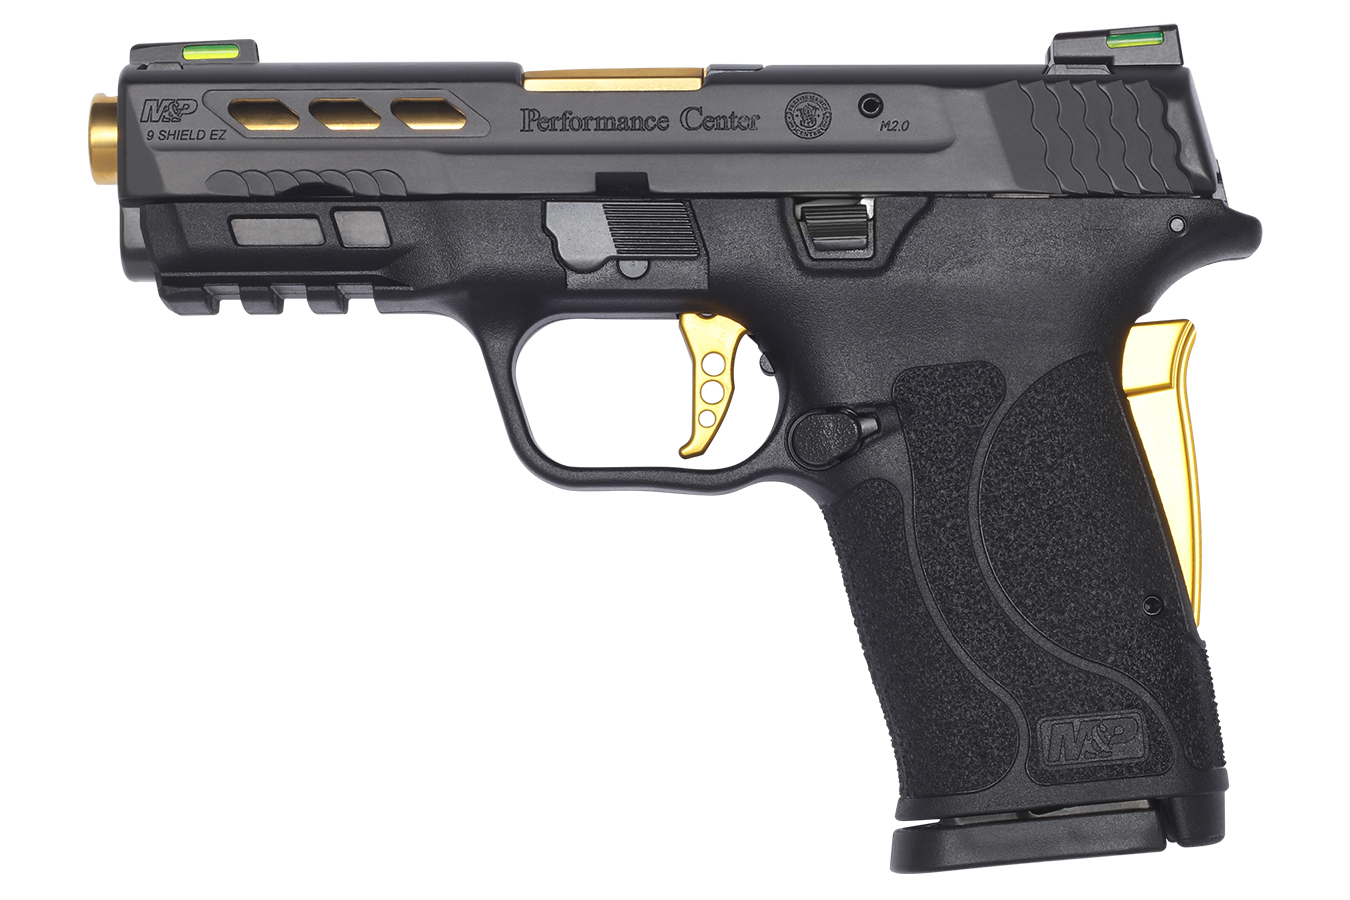 smith-wesson-m-p9-shield-ez-9mm-performance-center-pistol-with-gold